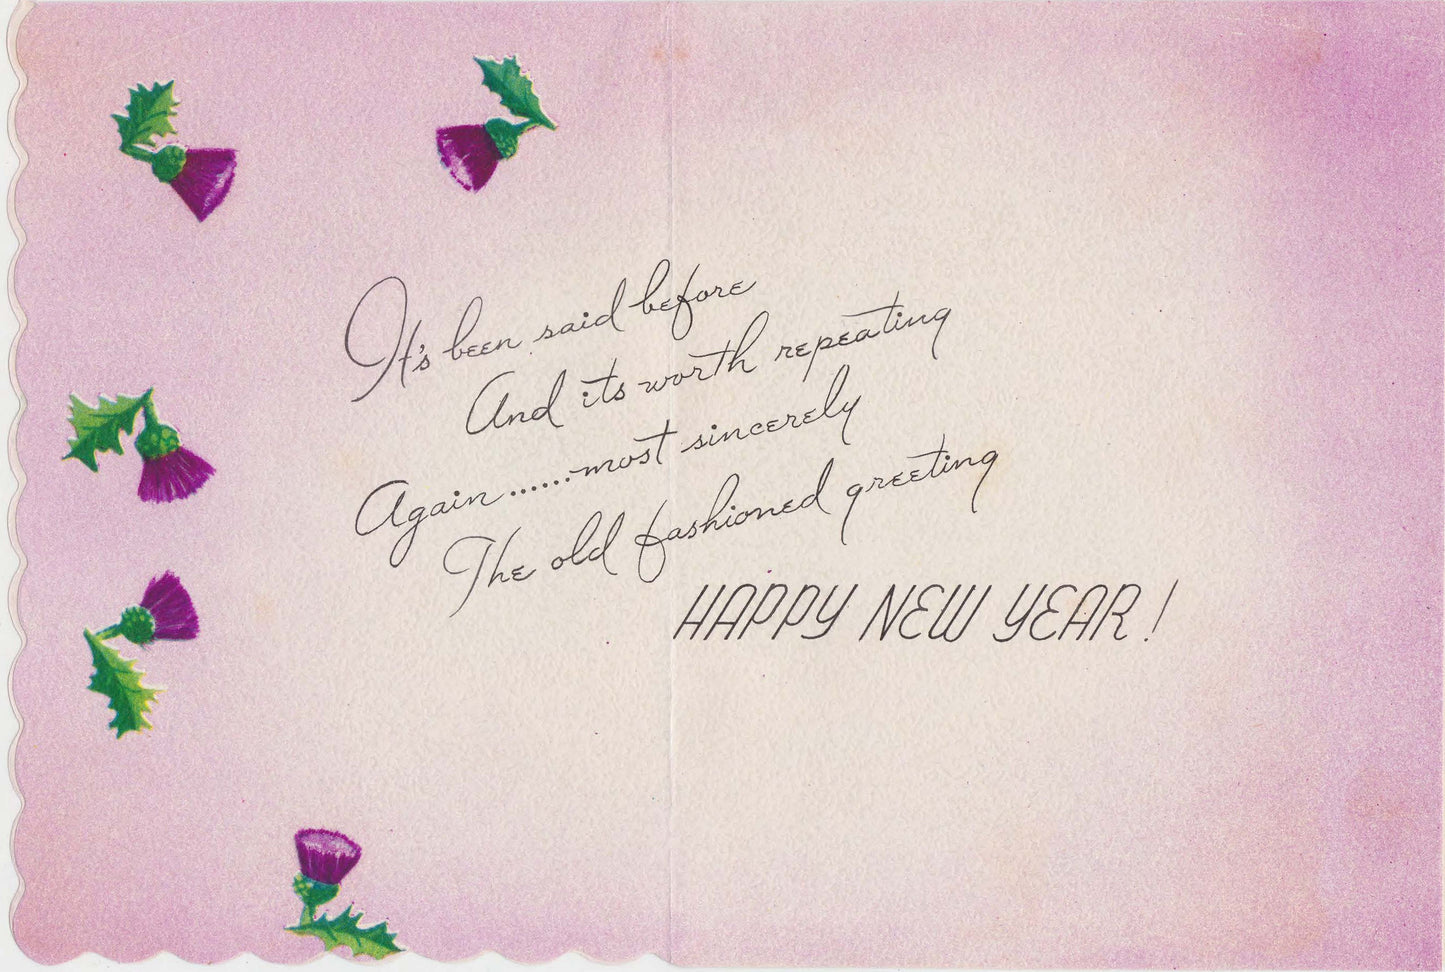 Harry Rogers Greeting Card #6